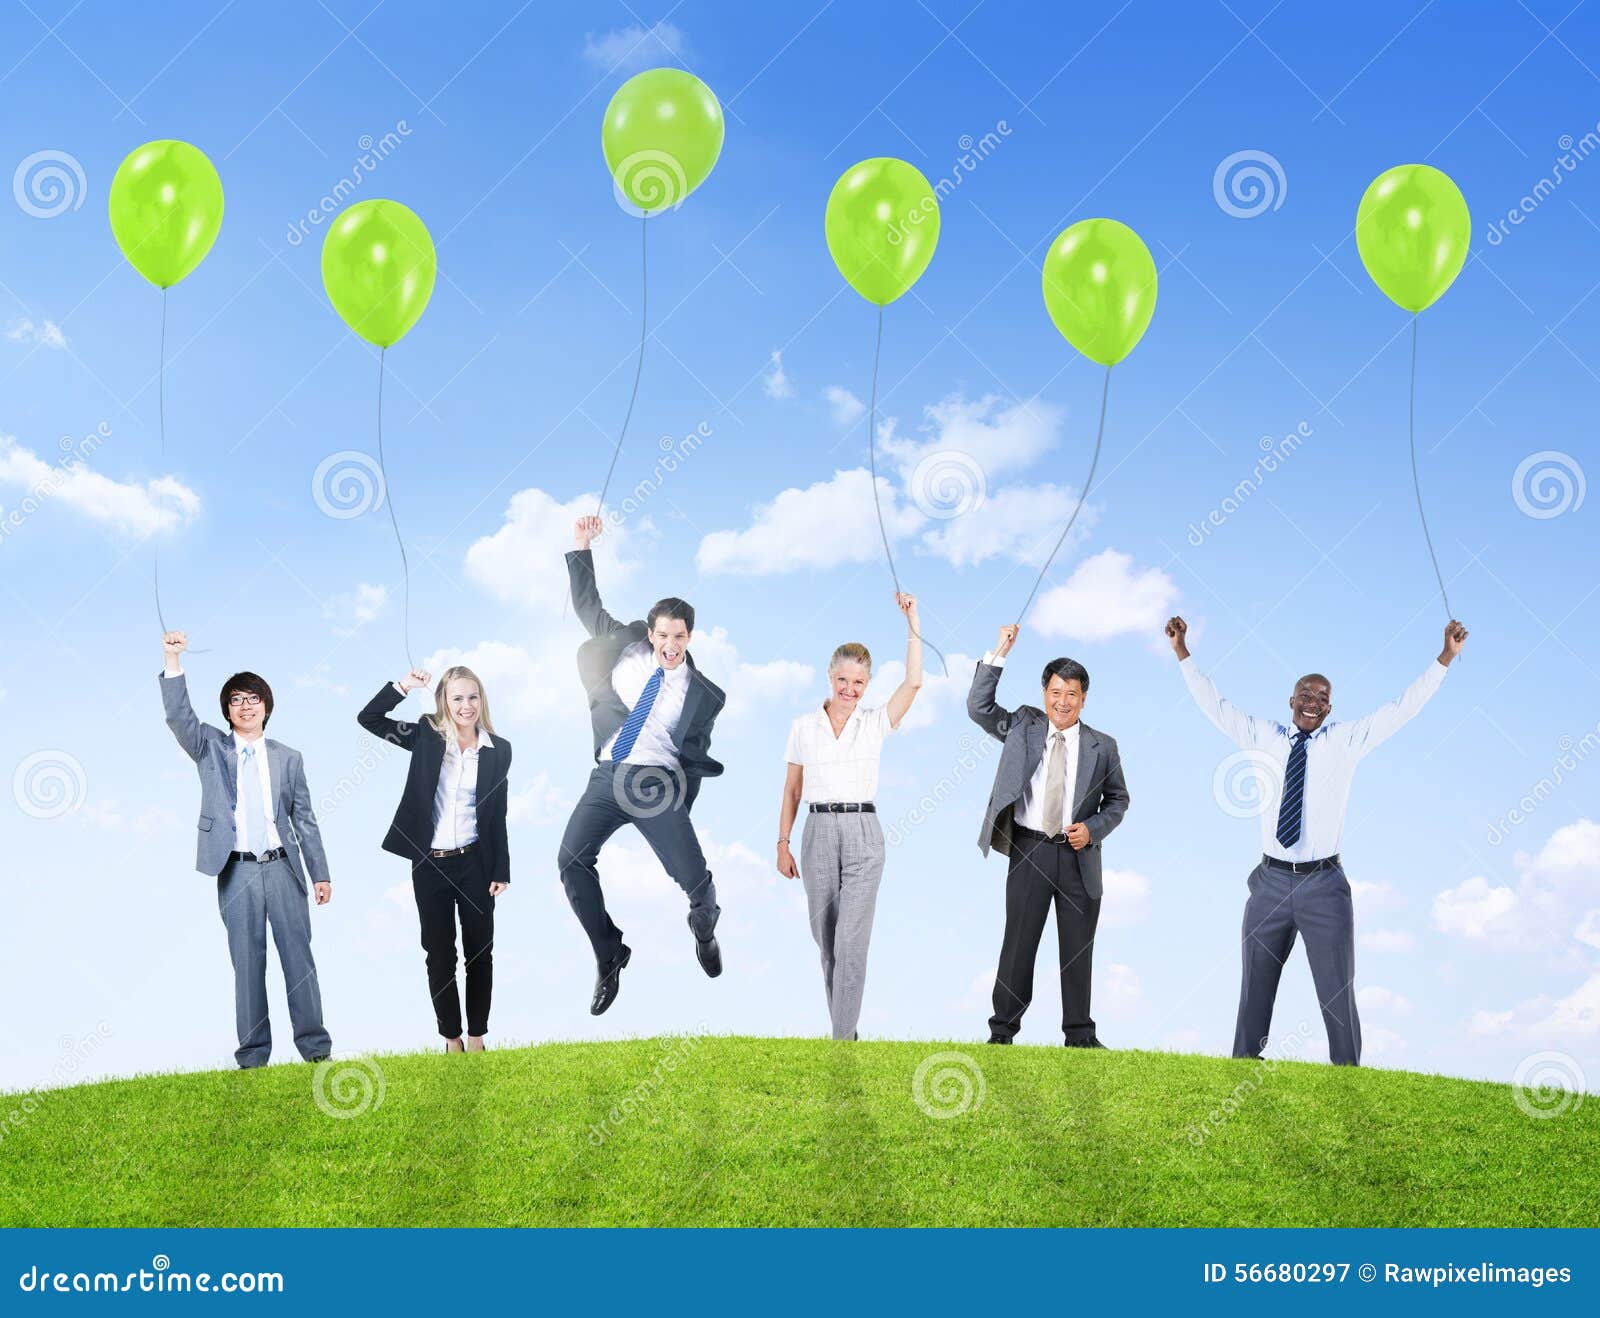 business people humor balloon support success confidence teamwork